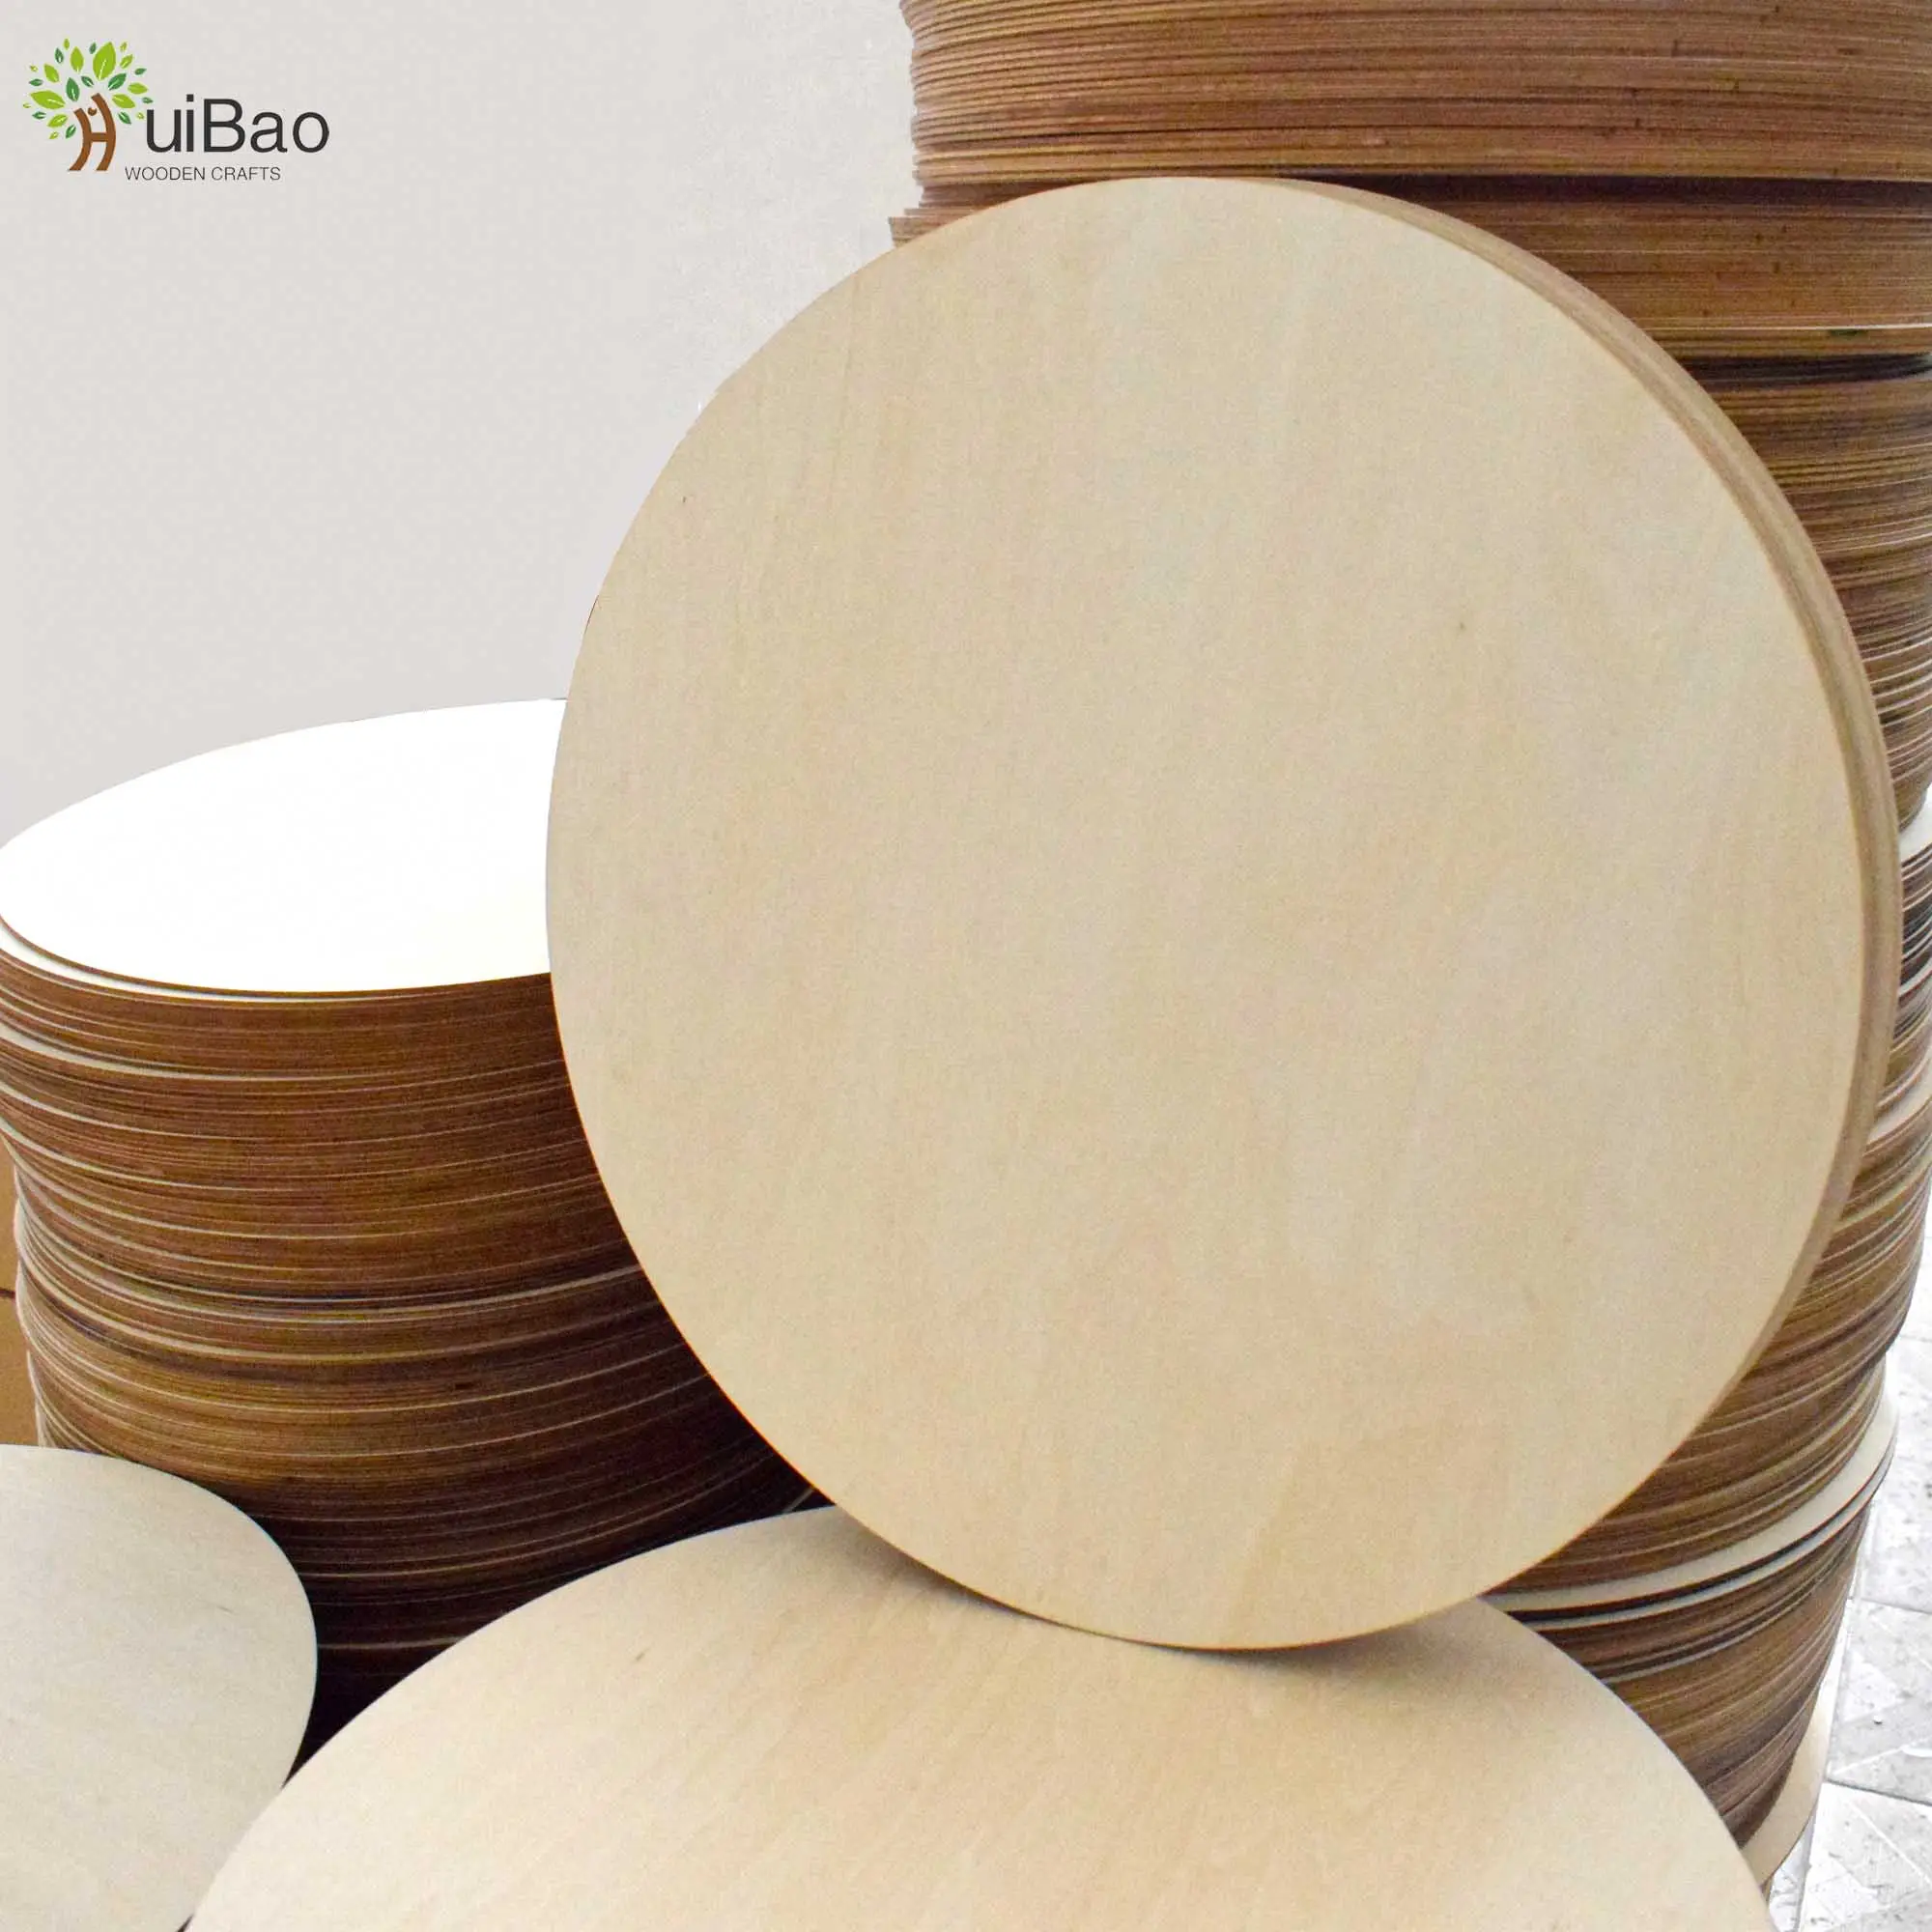 Customized Laser Cutting Blank Wood Round Diy Painting Wood Slices Natural Basswood Circle Craft Unpainted Wooden Circle